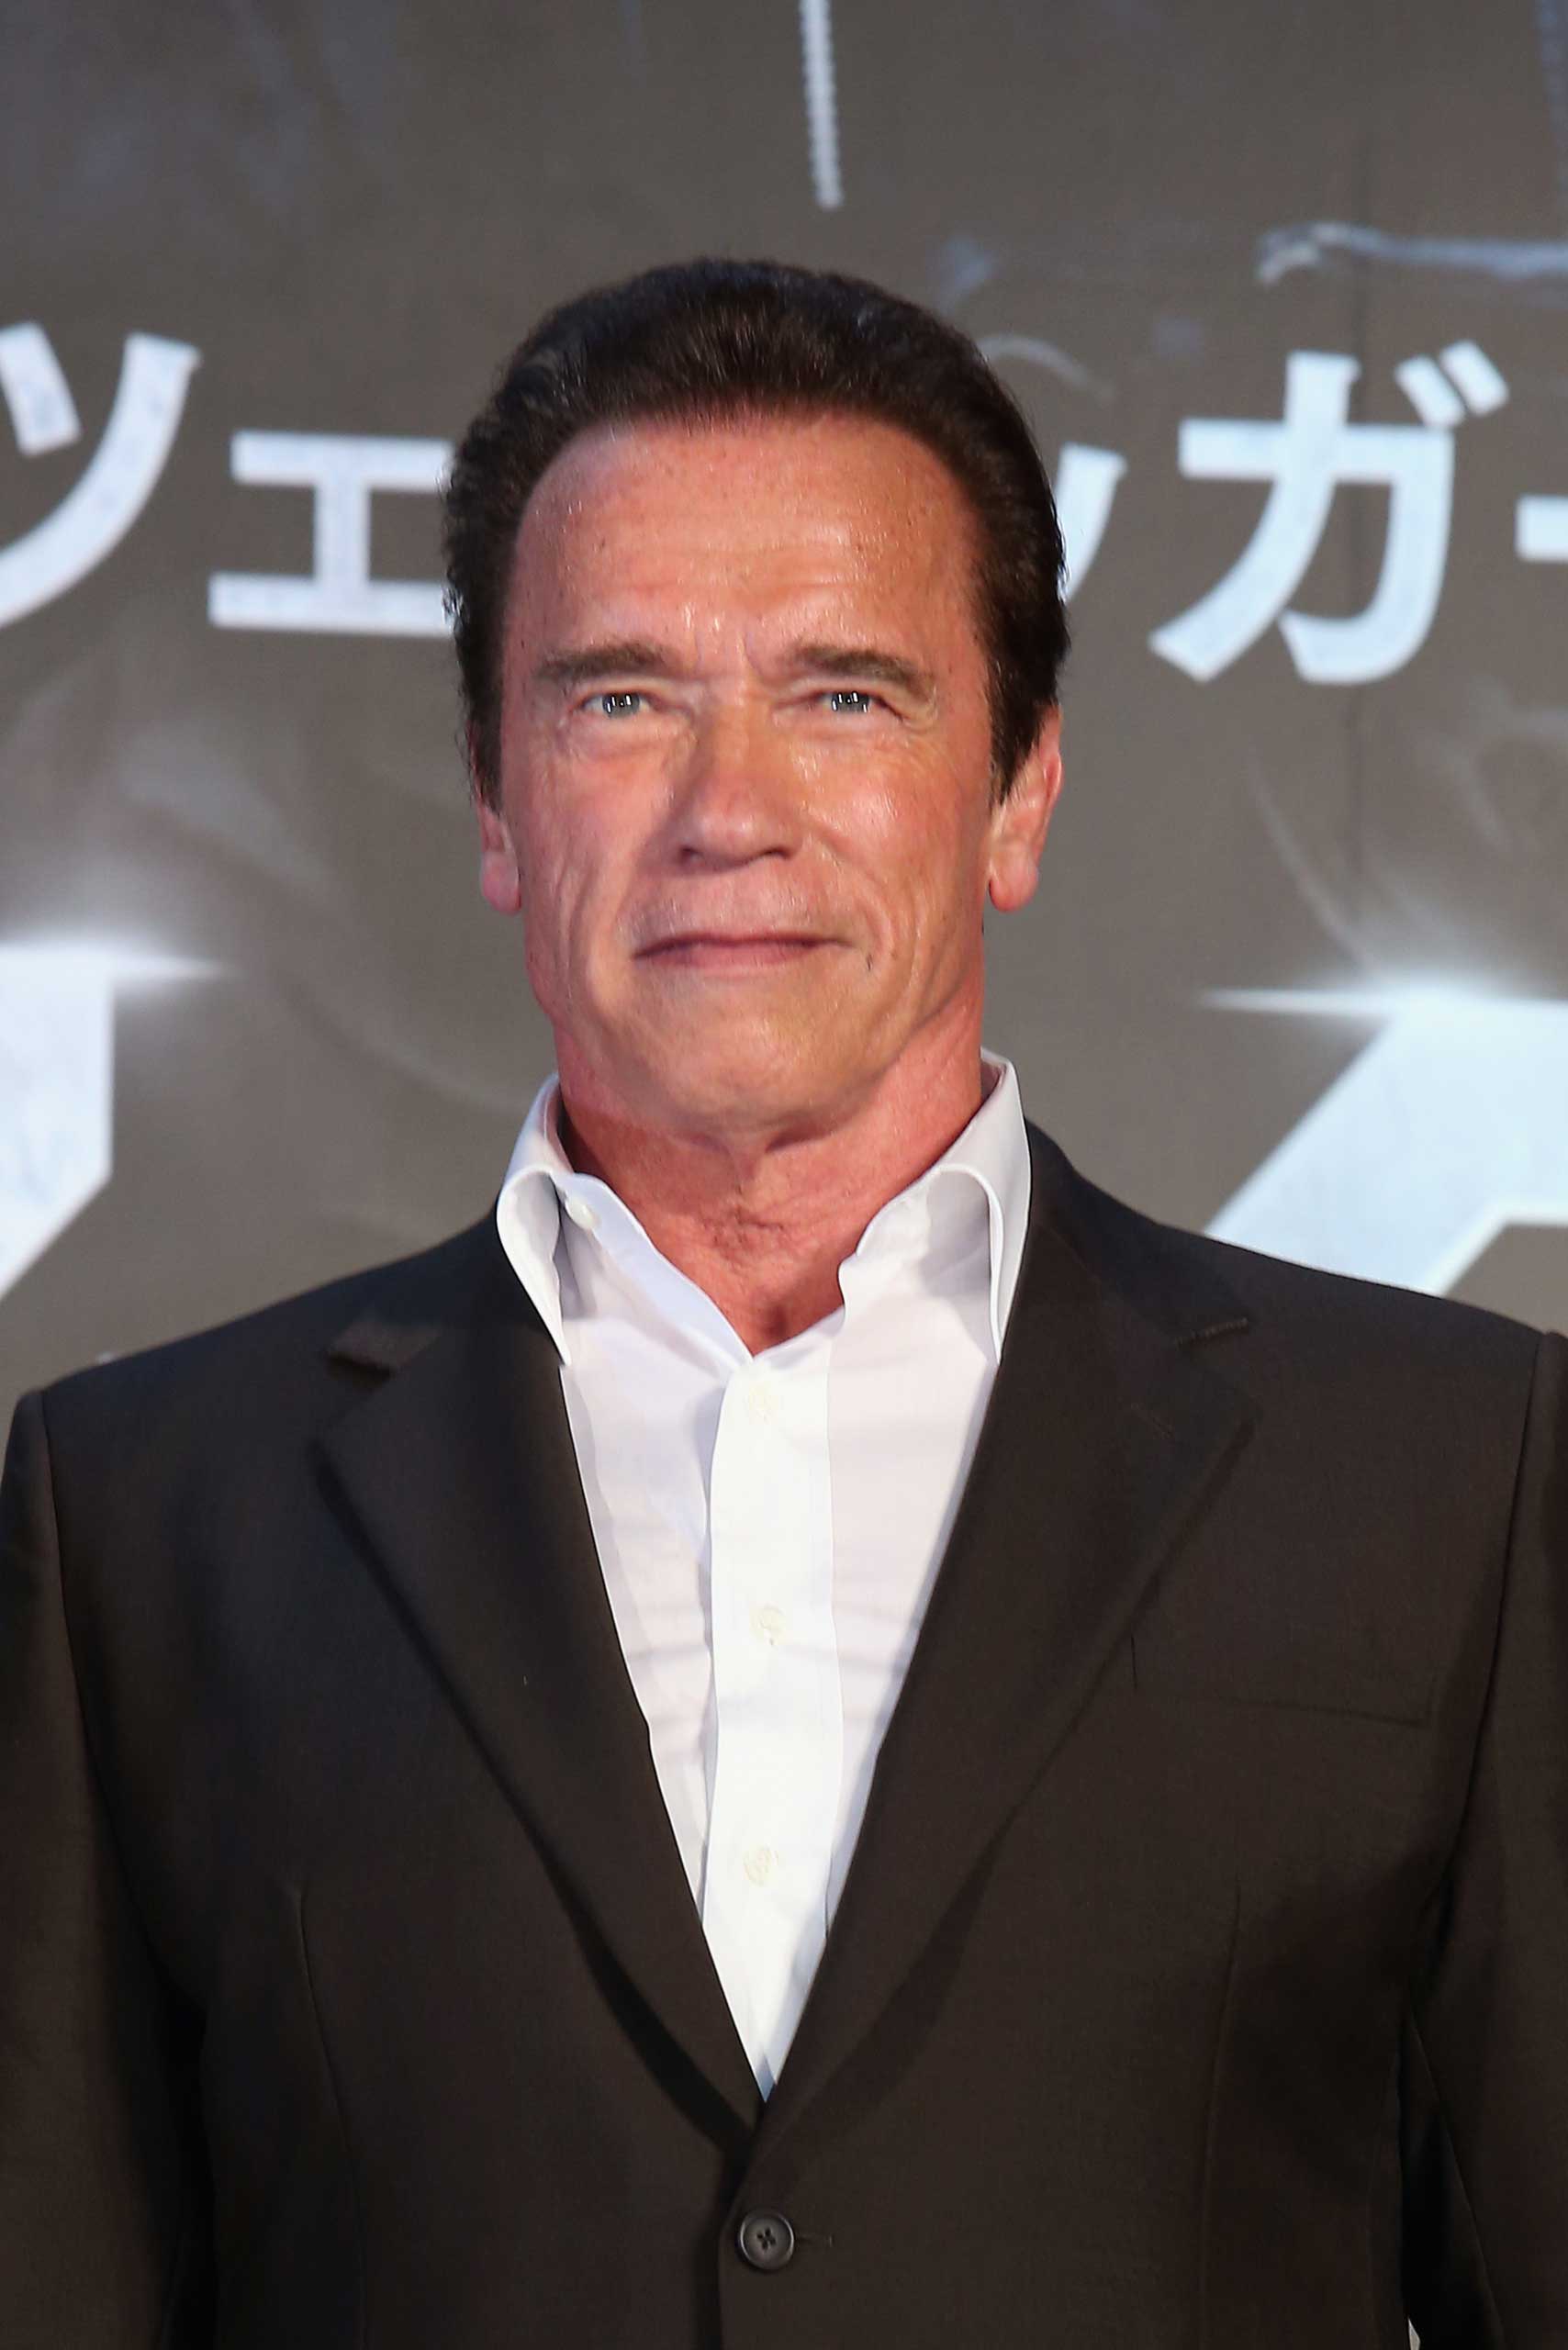 Arnold Schwarzenegger attends the Tokyo Premiere of 'Terminator Genisys' at the Roppongi Hills Arena in Tokyo, on July 6, 2015 (Ken Ishii — Getty Images)